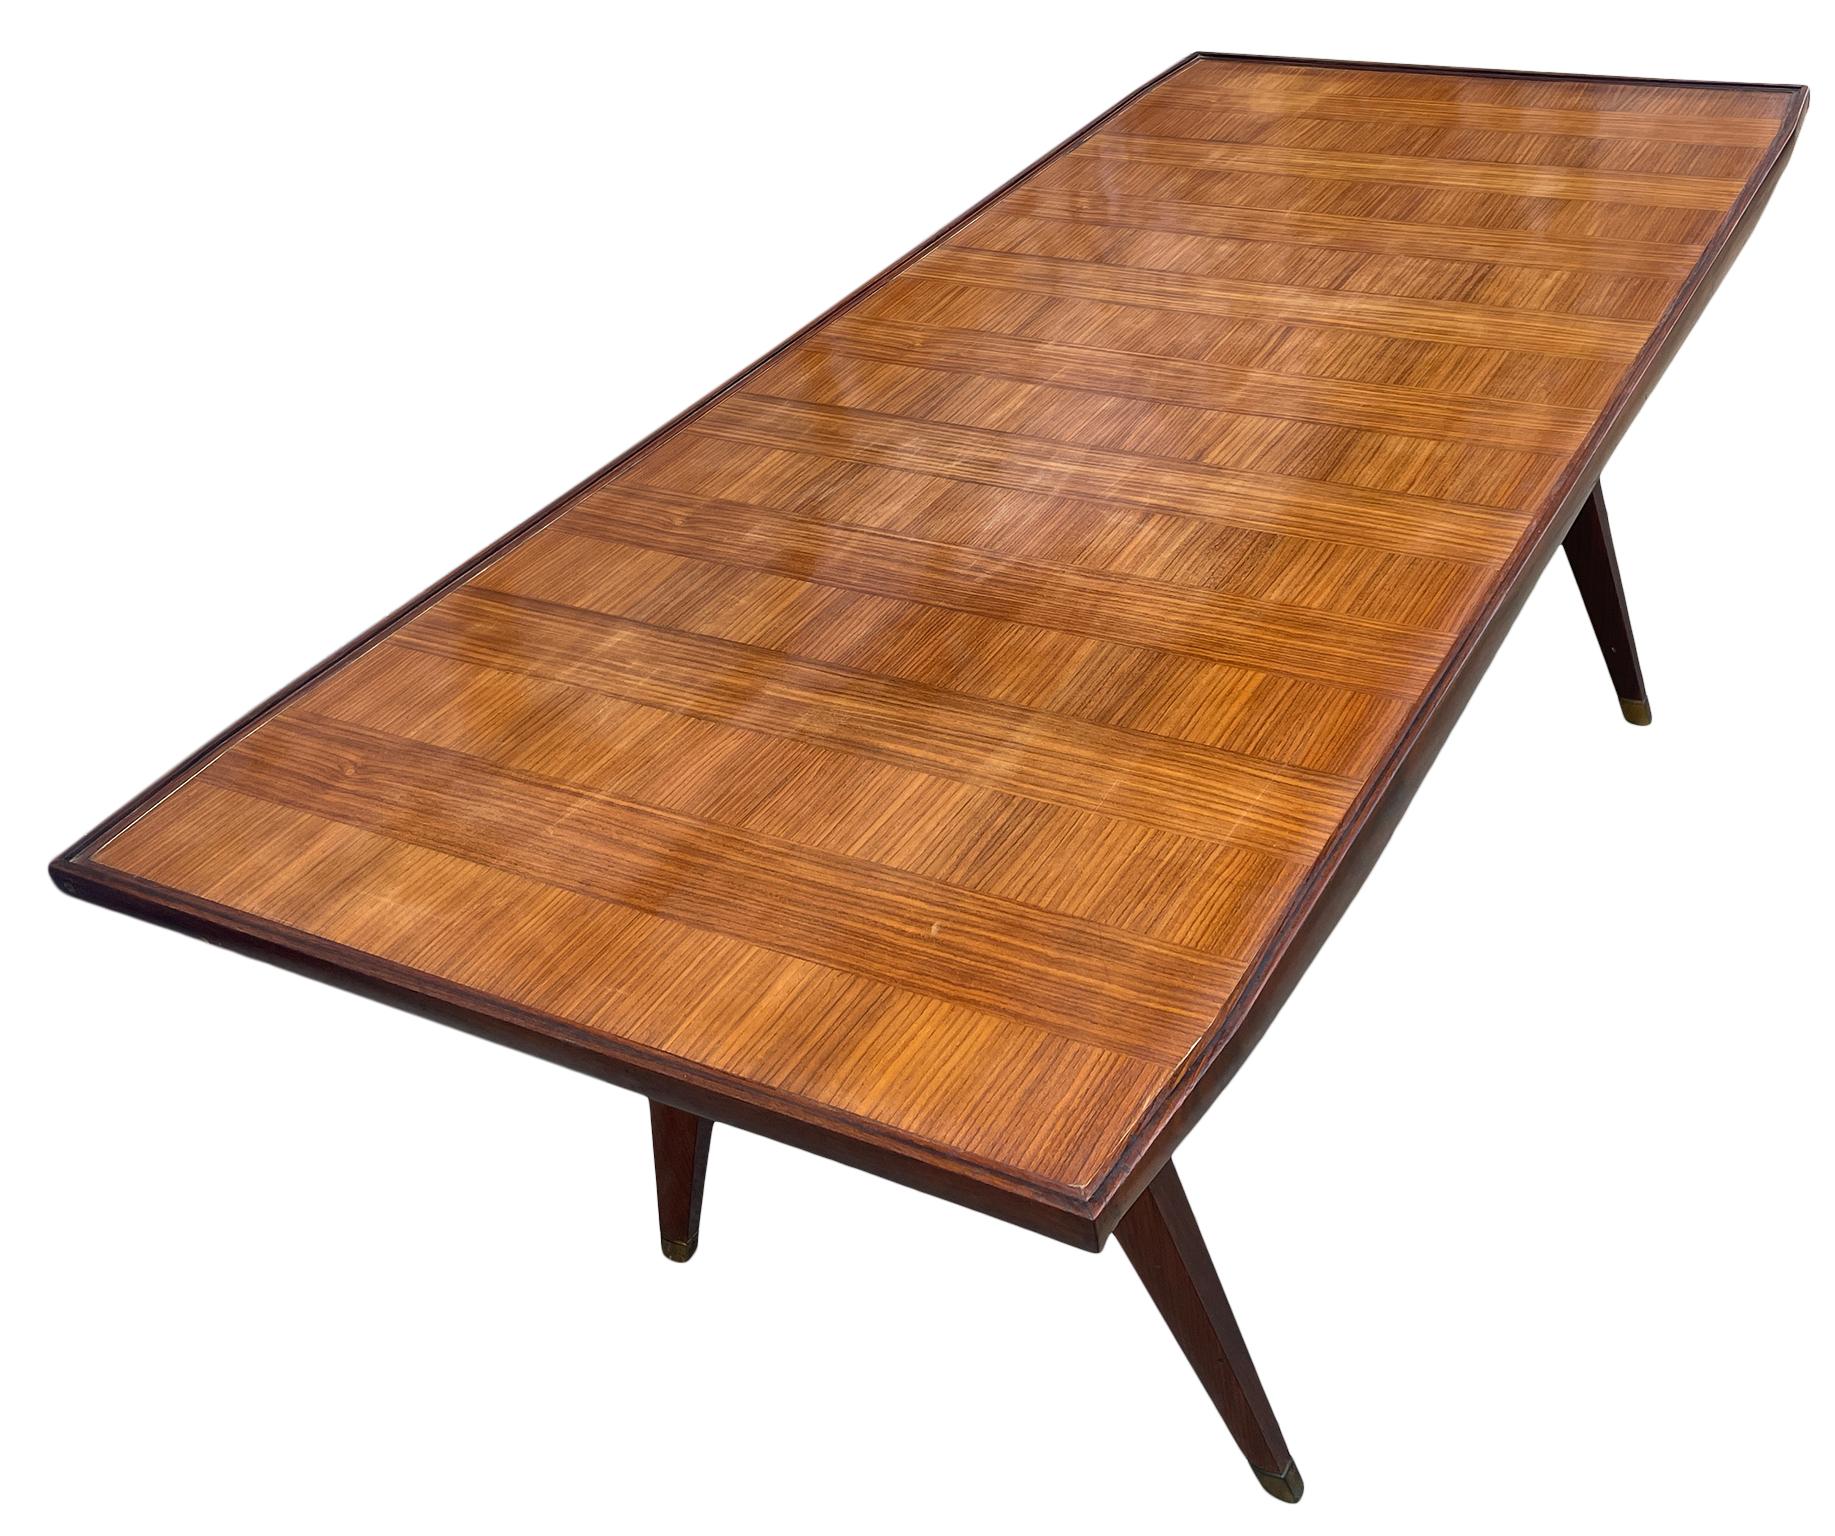 Mid-20th Century Mid-Century Modern Italian Dining Table rosewood with Glass Top Brass Feet